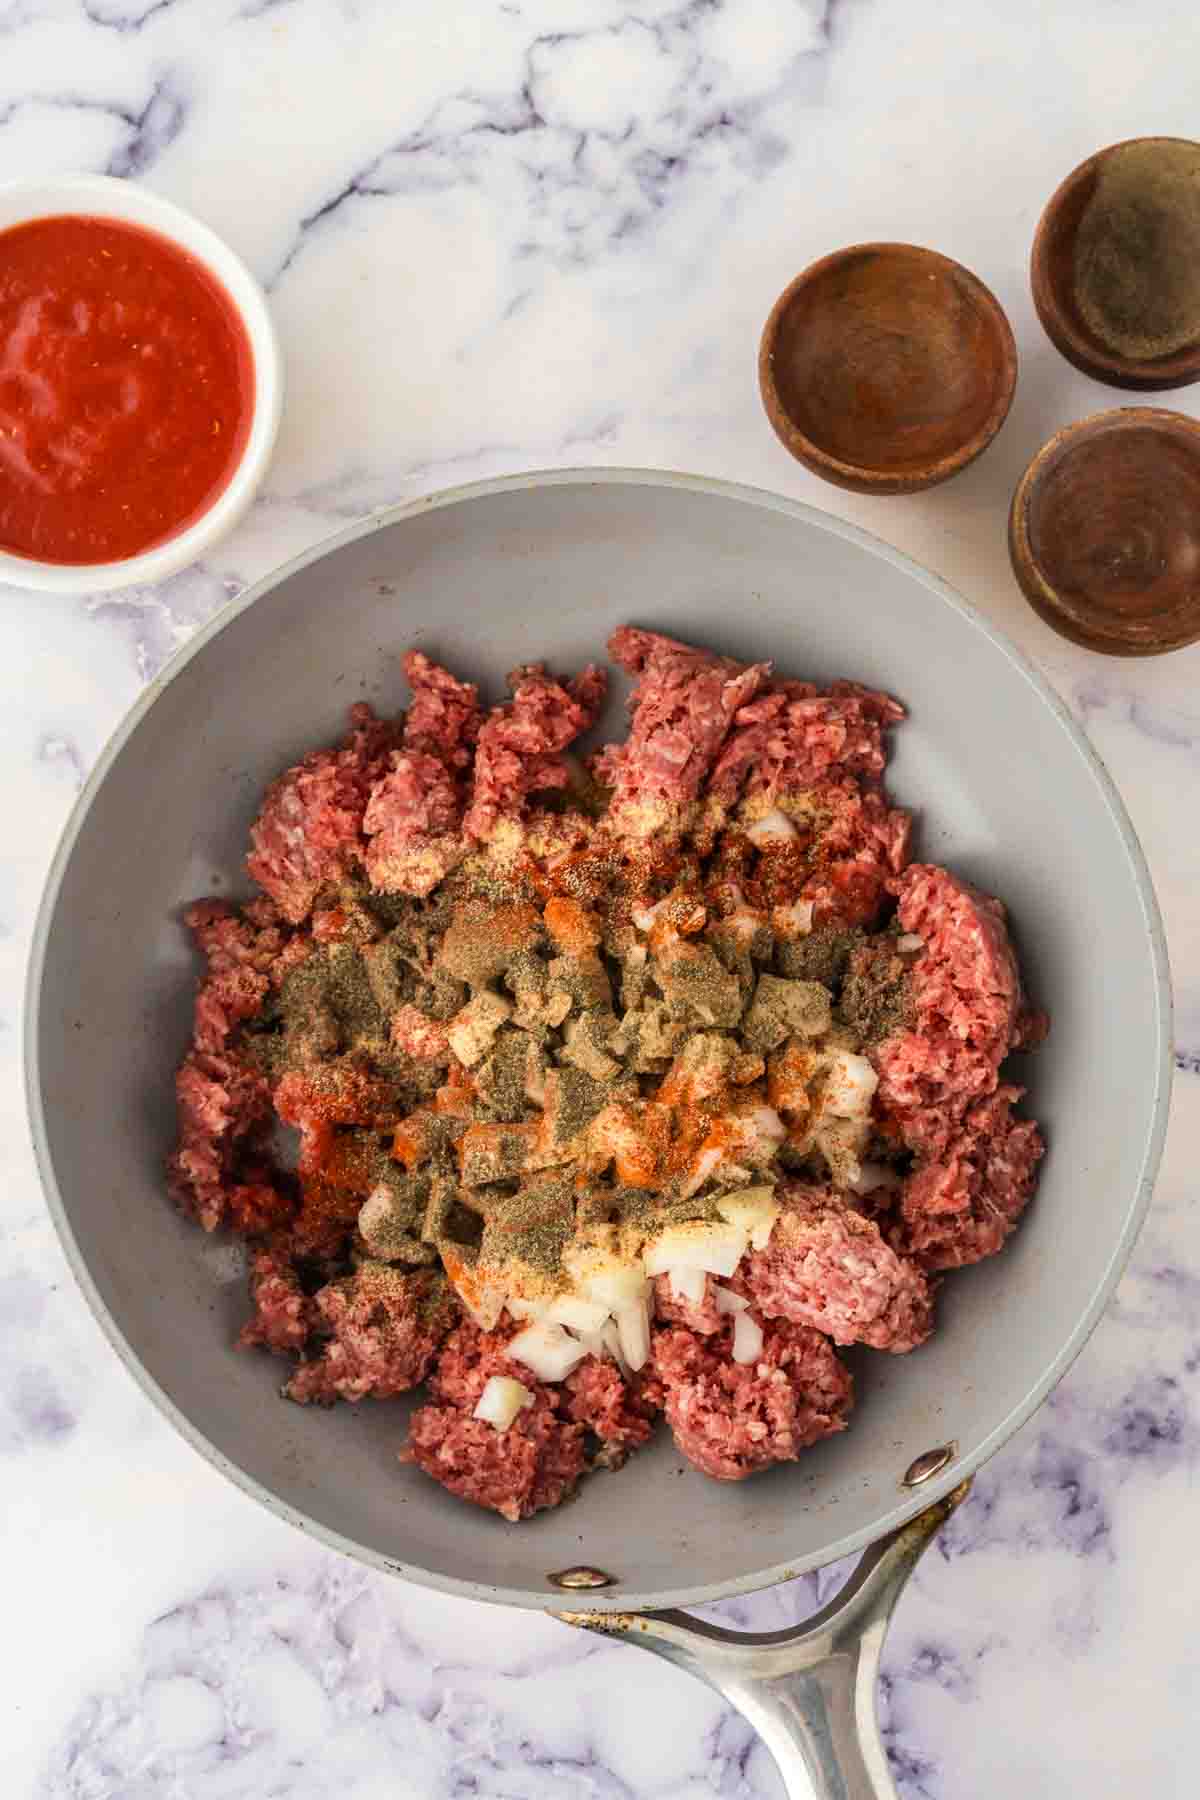 pan cooking hamburger and other raw ingredients for hot dog chili recipe